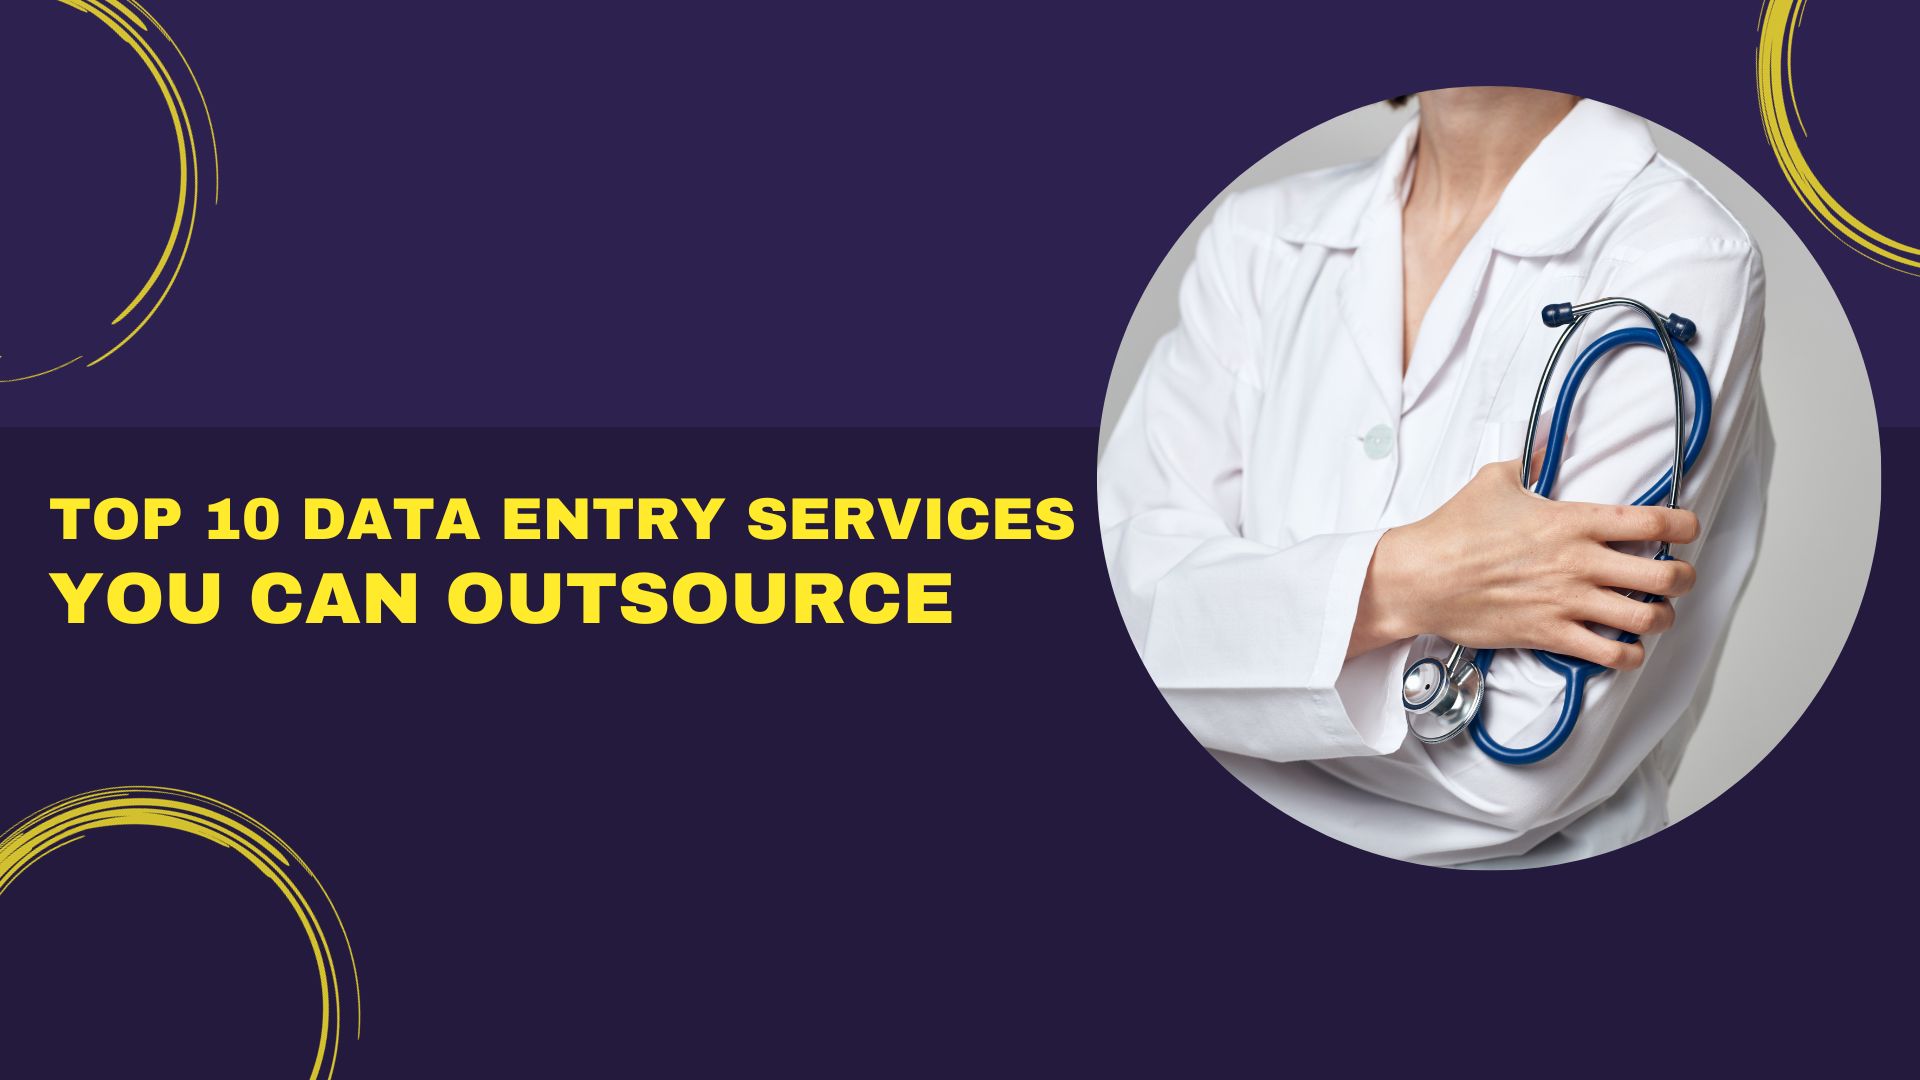 Top 10 Data Entry Services You Can Outsource